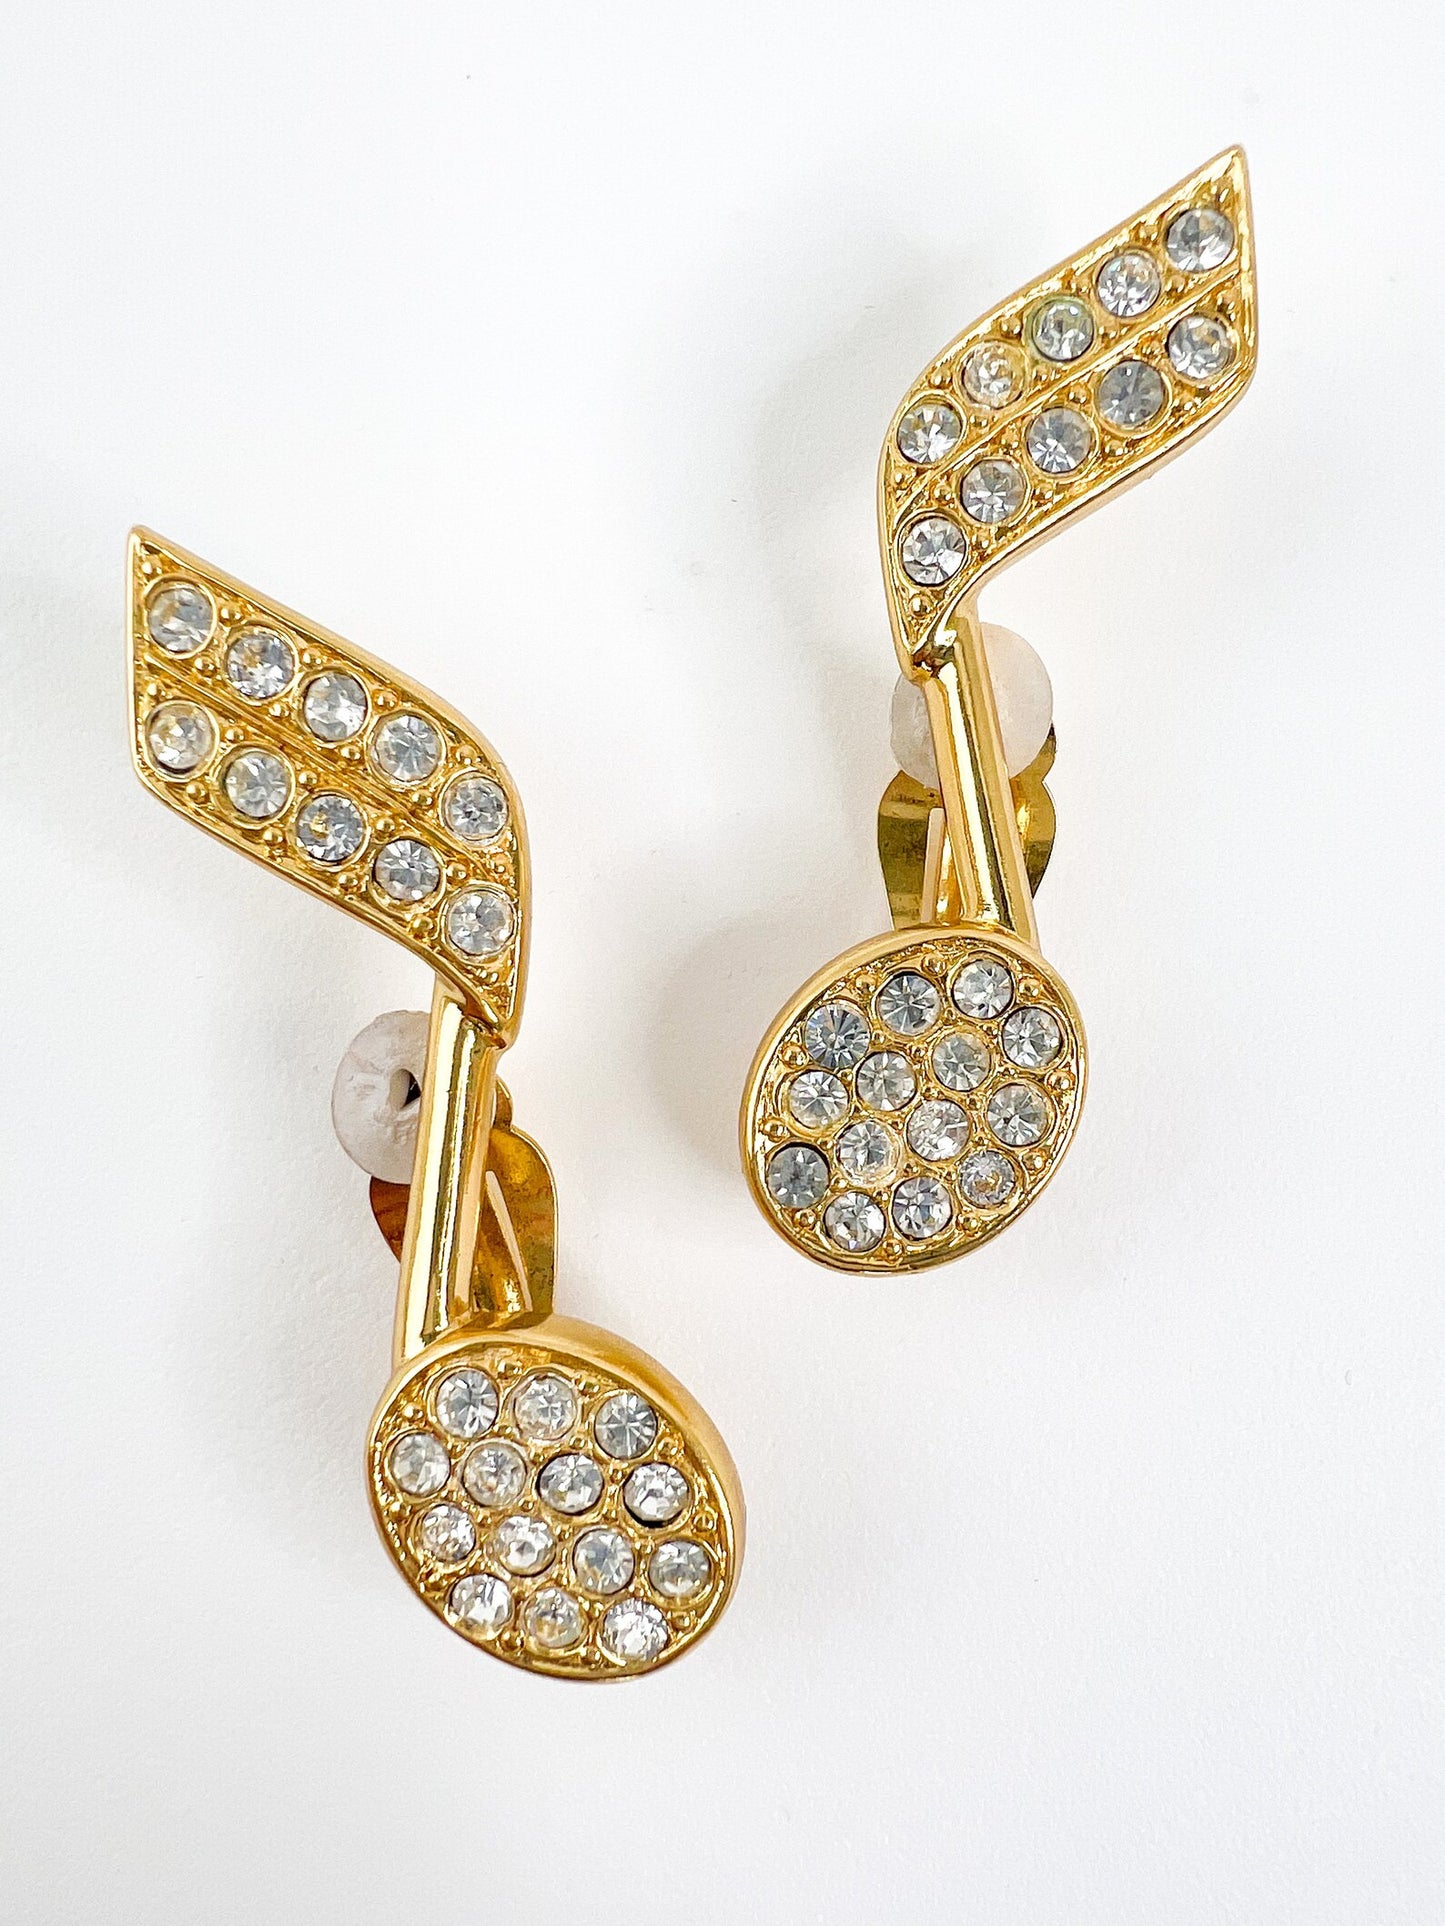 【SOLD OUT】 YSL Yves Saint Laurent Vintage Earrings Musical Note Pink Made in France